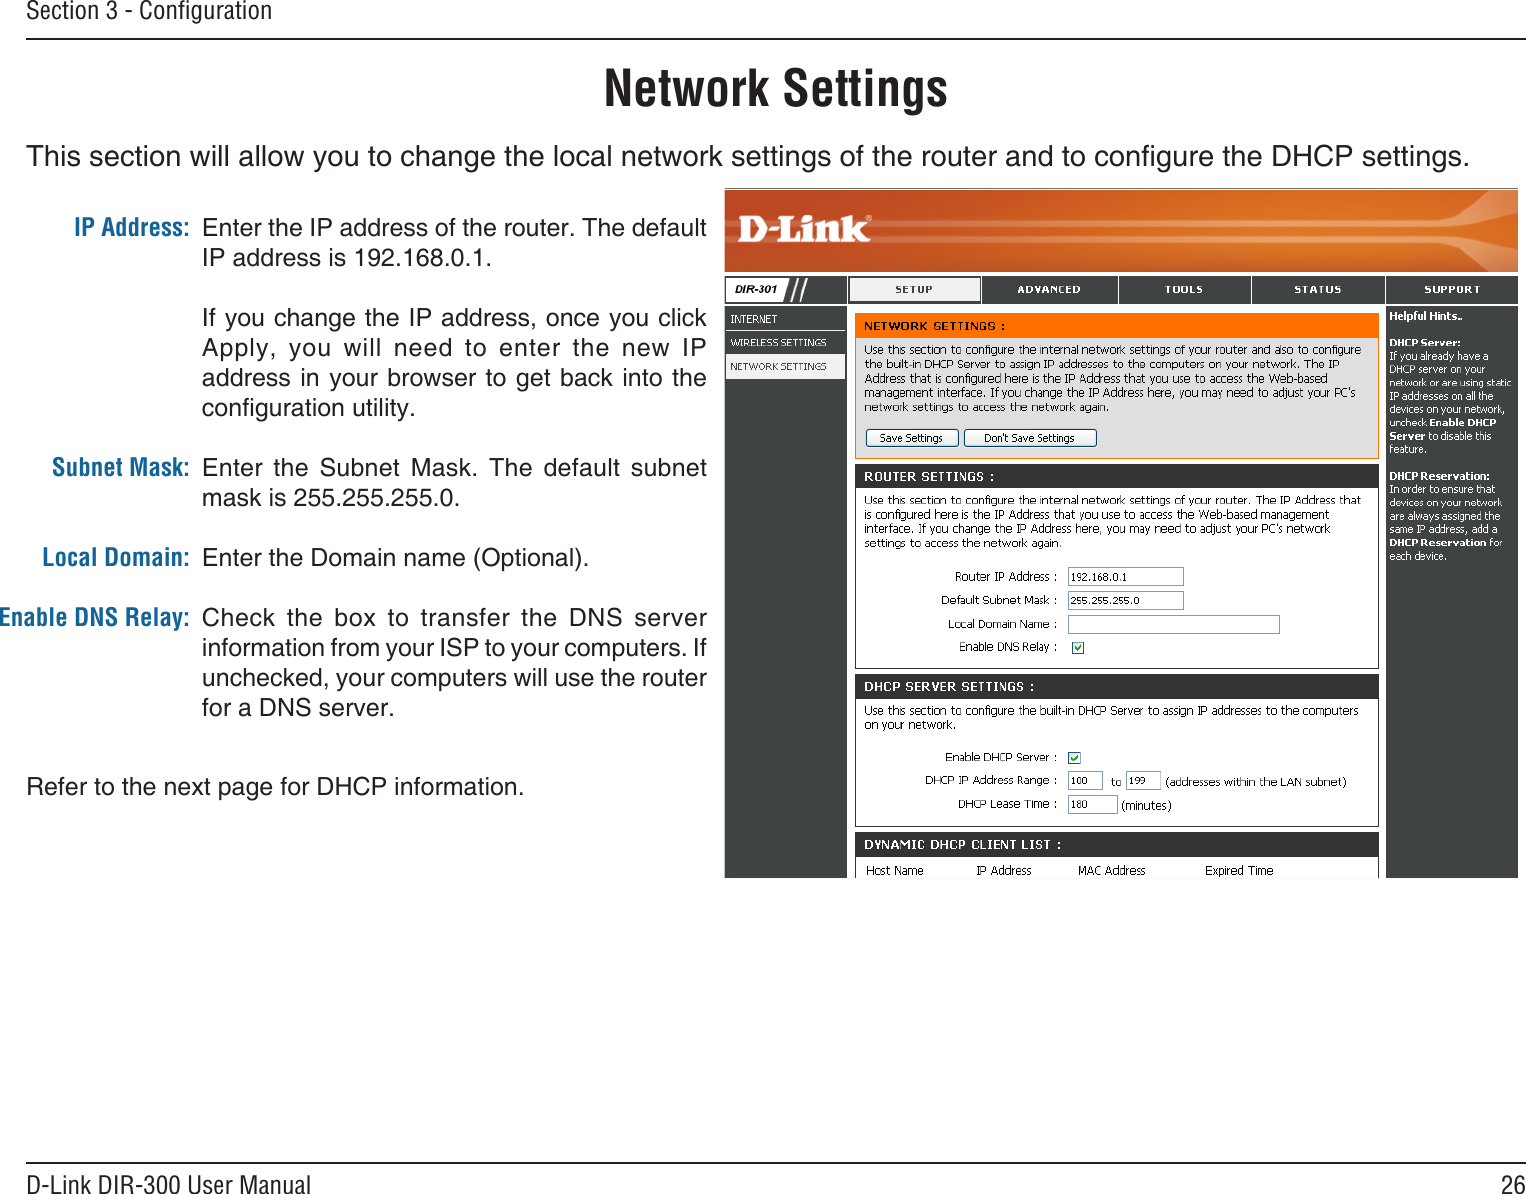 26D-Link DIR-300 User ManualSection 3 - ConﬁgurationThis section will allow you to change the local network settings of the router and to congure the DHCP settings.Network SettingsEnter the IP address of the router. The default IP address is 192.168.0.1.If you change the IP address, once you click Apply,  you  will  need  to  enter  the  new  IP address in your browser  to get back into the conguration utility.Enter  the  Subnet  Mask.  The  default  subnet mask is 255.255.255.0.Enter the Domain name (Optional).Check  the  box  to  transfer  the  DNS  server information from your ISP to your computers. If unchecked, your computers will use the router for a DNS server.IP Address:Subnet Mask:Local Domain:Enable DNS Relay:Refer to the next page for DHCP information.